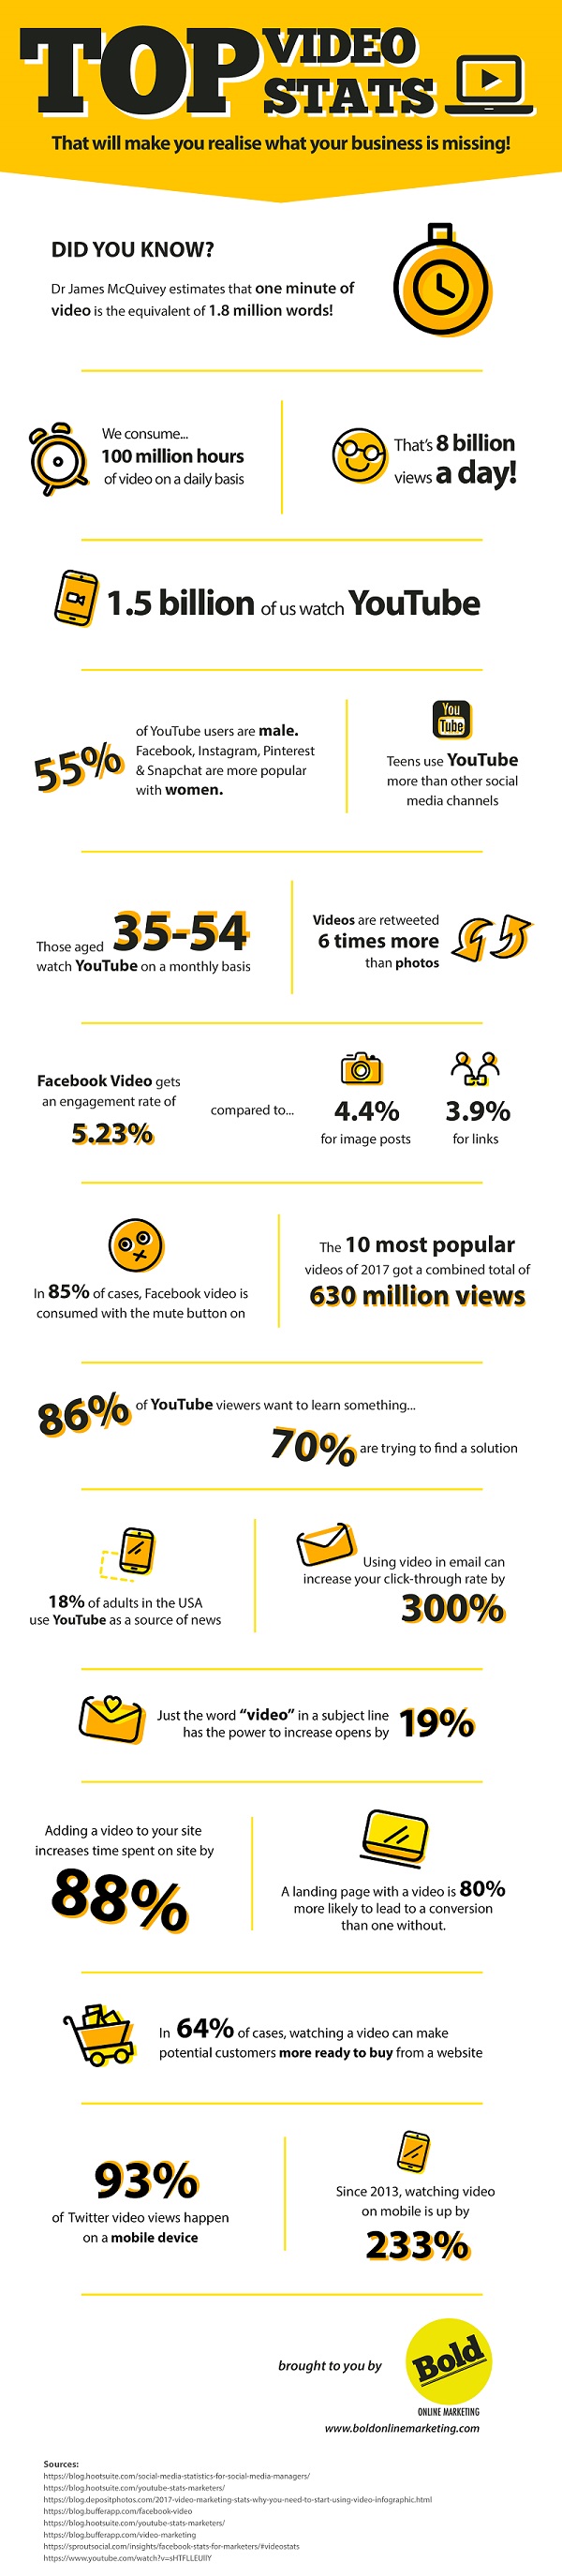 TOP VIDEO STATS THAT WILL MAKE YOU REALISE WHAT YOUR BUSINESS IS MISSING